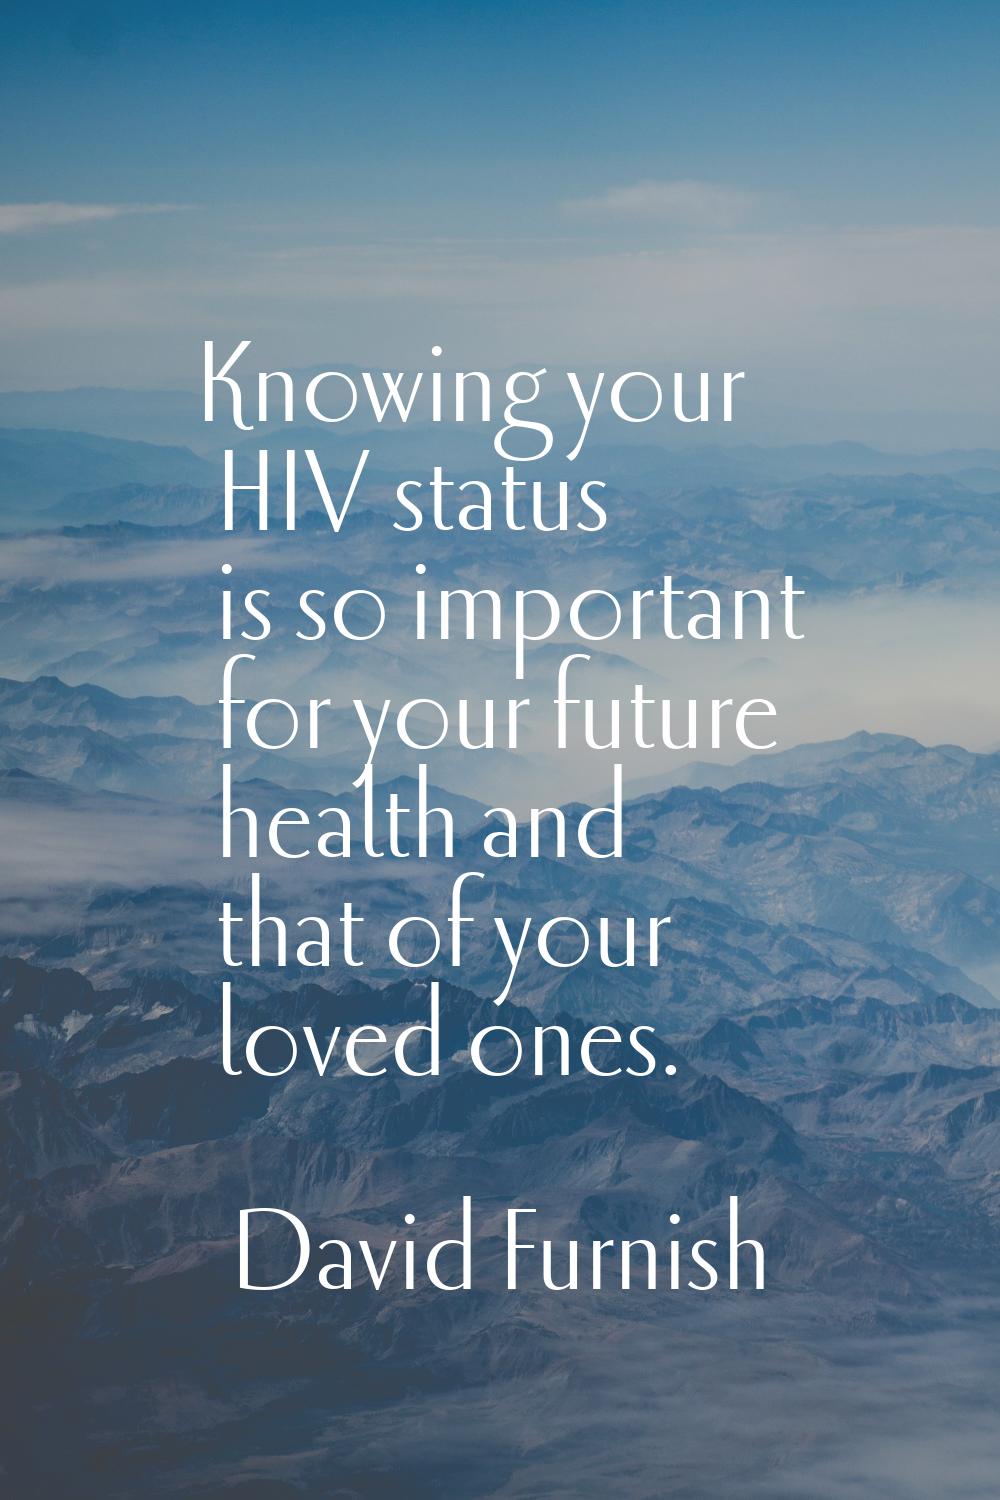 Knowing your HIV status is so important for your future health and that of your loved ones.